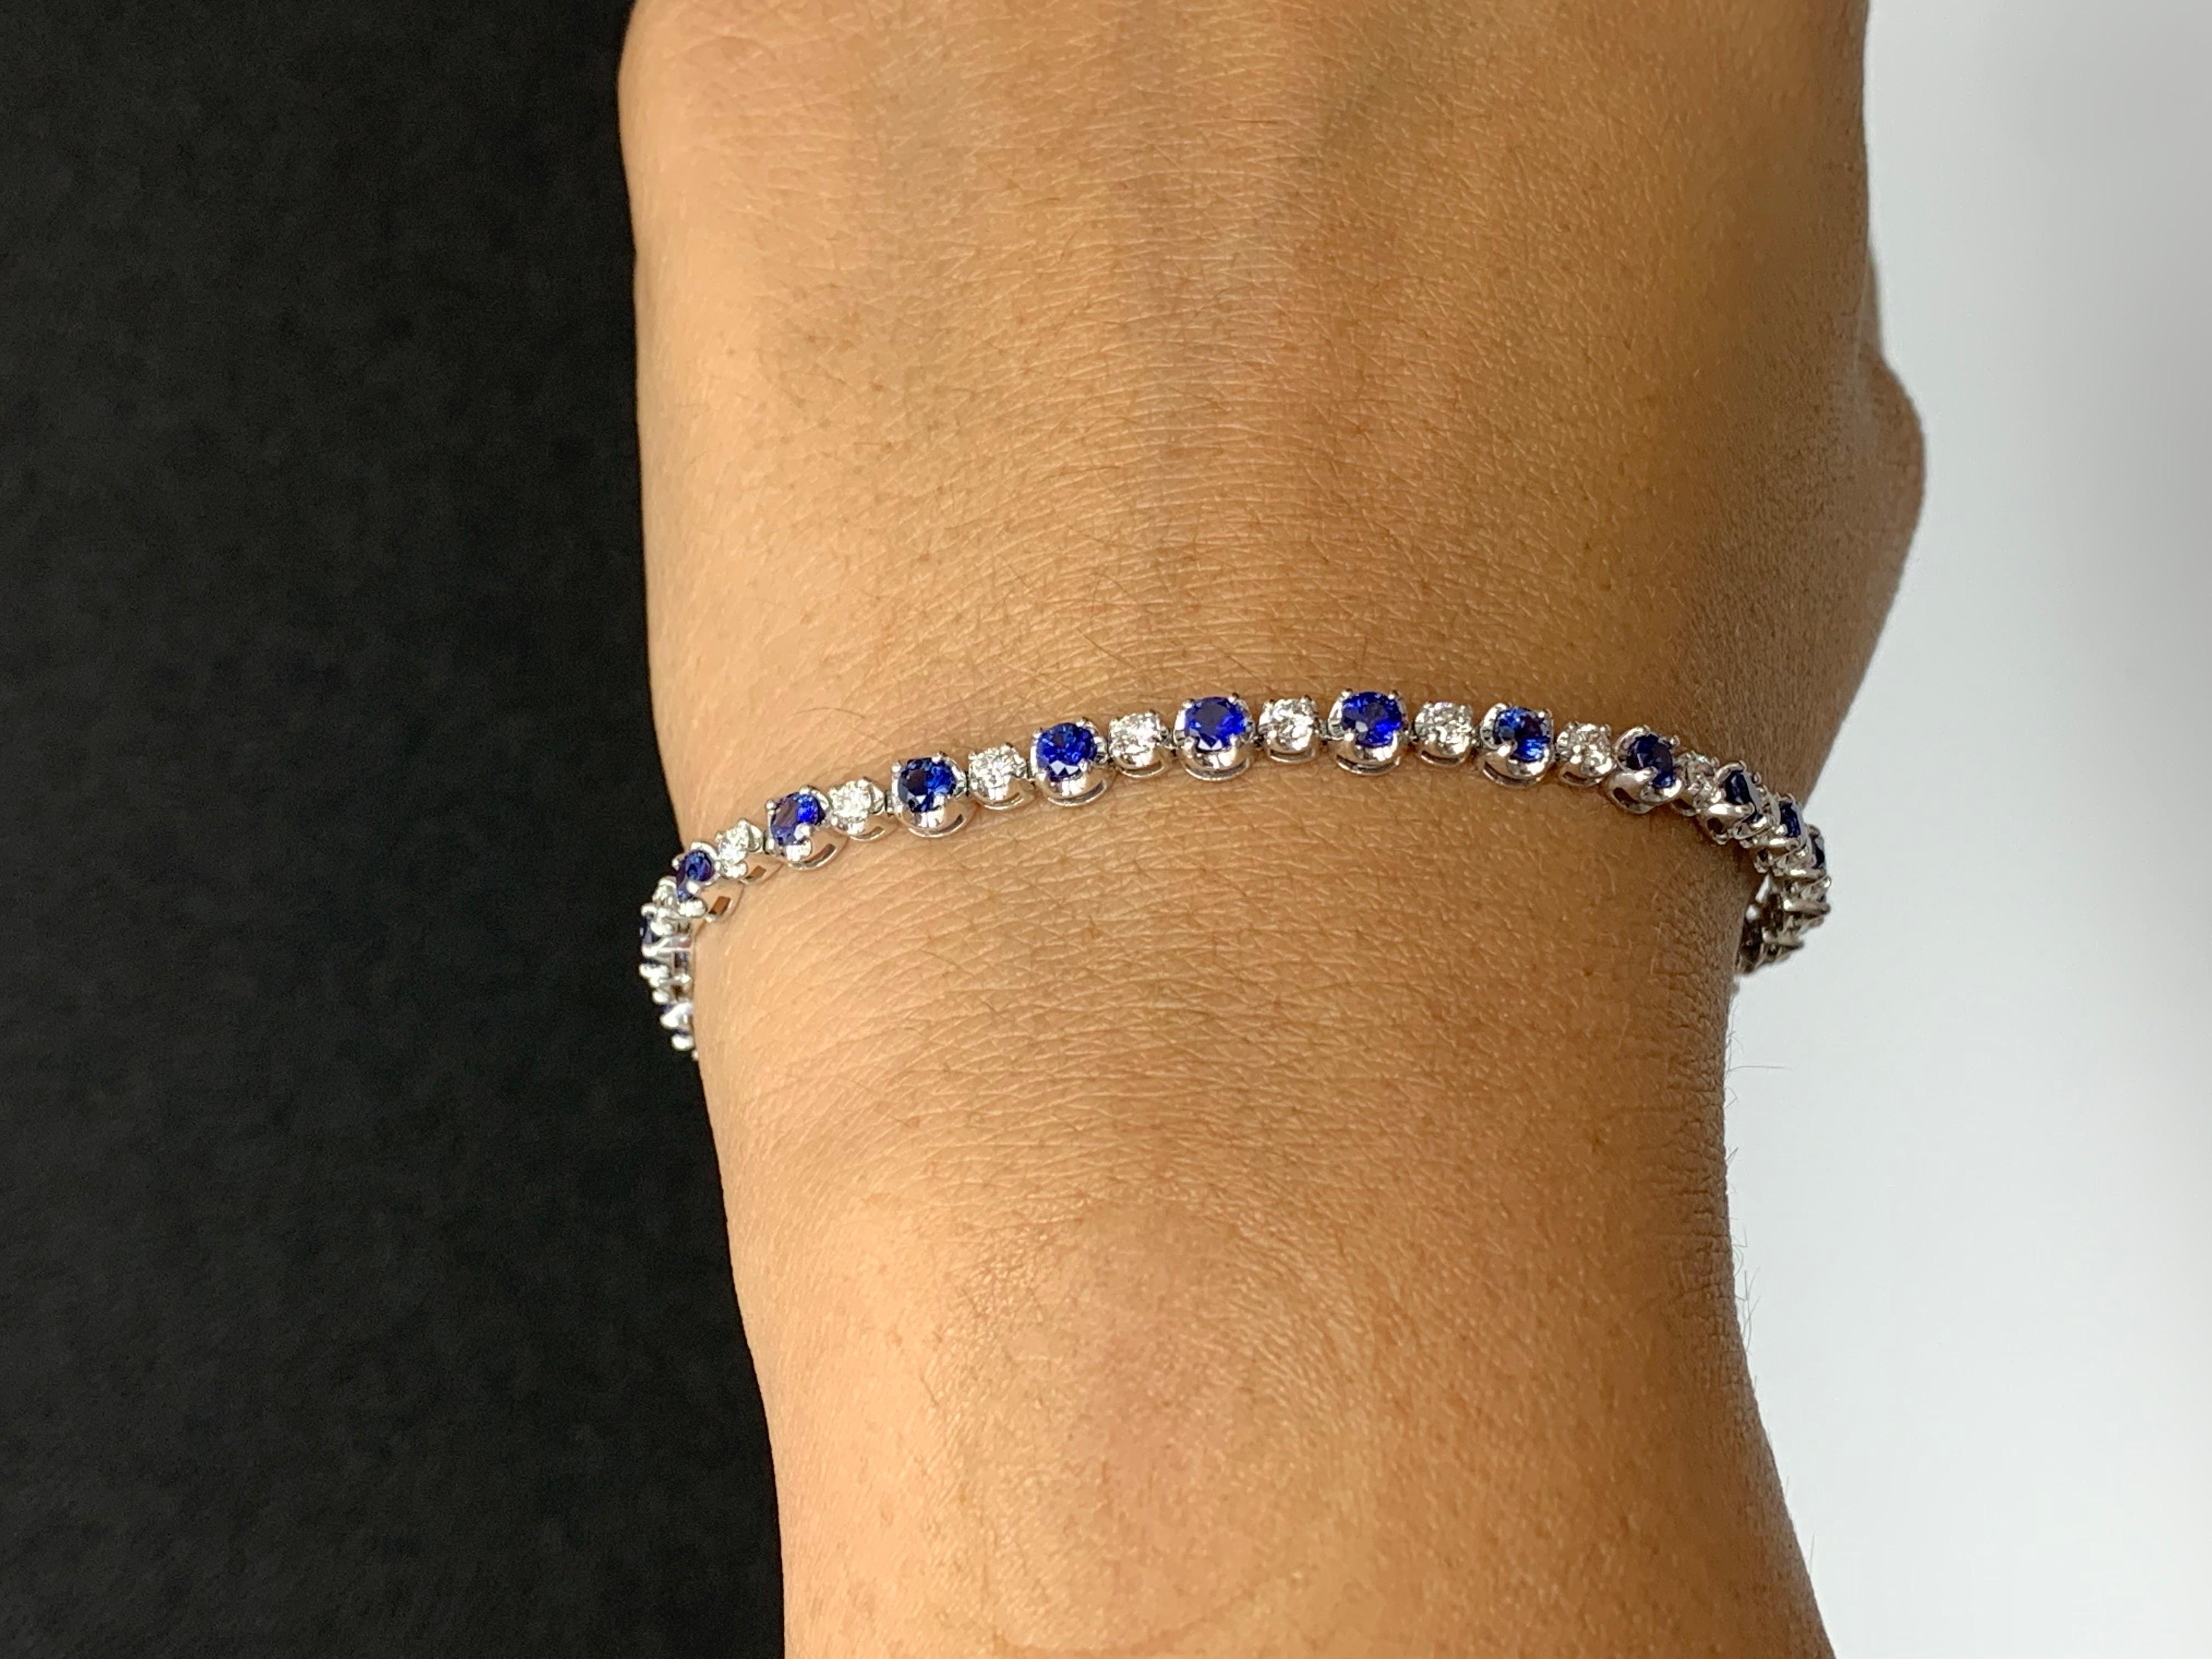 2.96 Carat Round Blue Sapphire and Diamond Bracelet in 14k White Gold For Sale 3